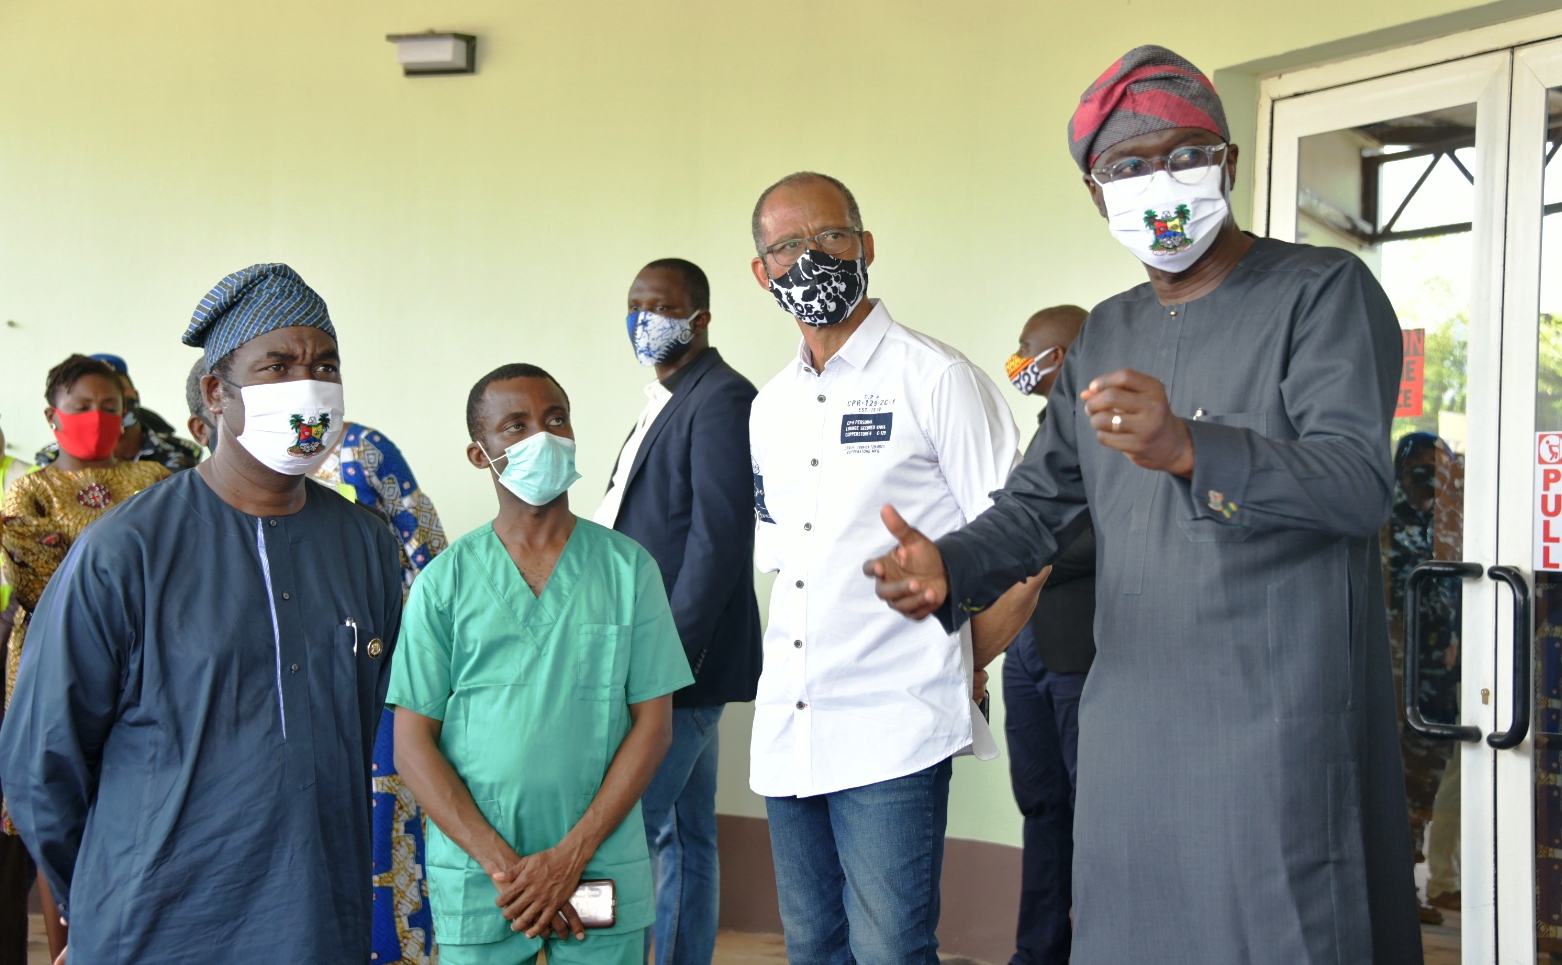 L-R: Lagos State Deputy Governor, Dr. Obafemi Hamzat; Dr. Tope Oguniyan; Commissioner for Health, Prof. Akin Abayomi and Governor Babajide Sanwo-Olu during the opening of Isolation Centre for the Coronavirus treatment at the Gbagada General Hospital, on Friday, May 1, 2020.